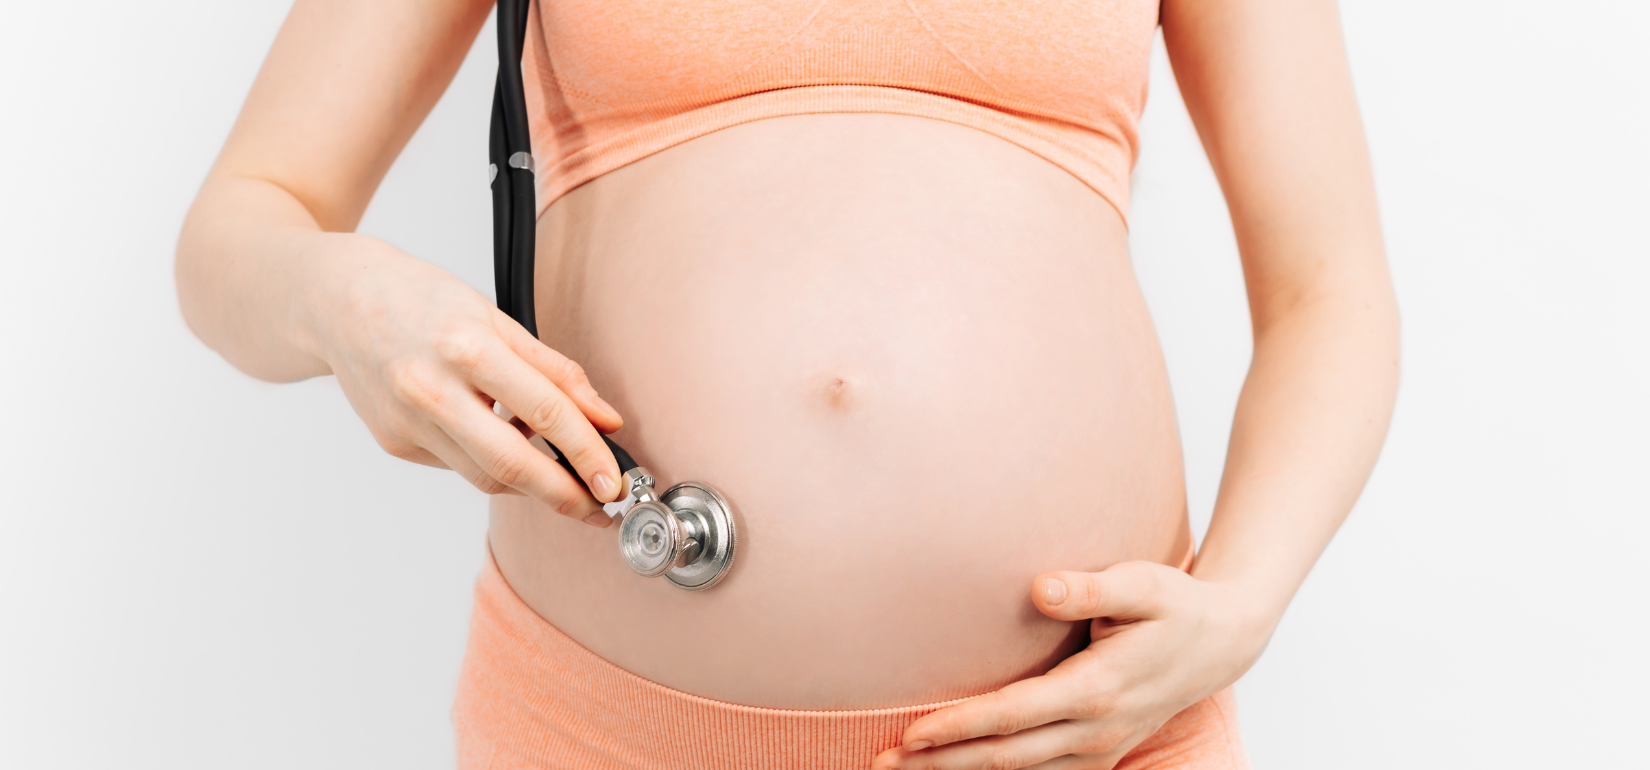 Physical activity during pregnancy lowers risks of complications and  preterm births - News